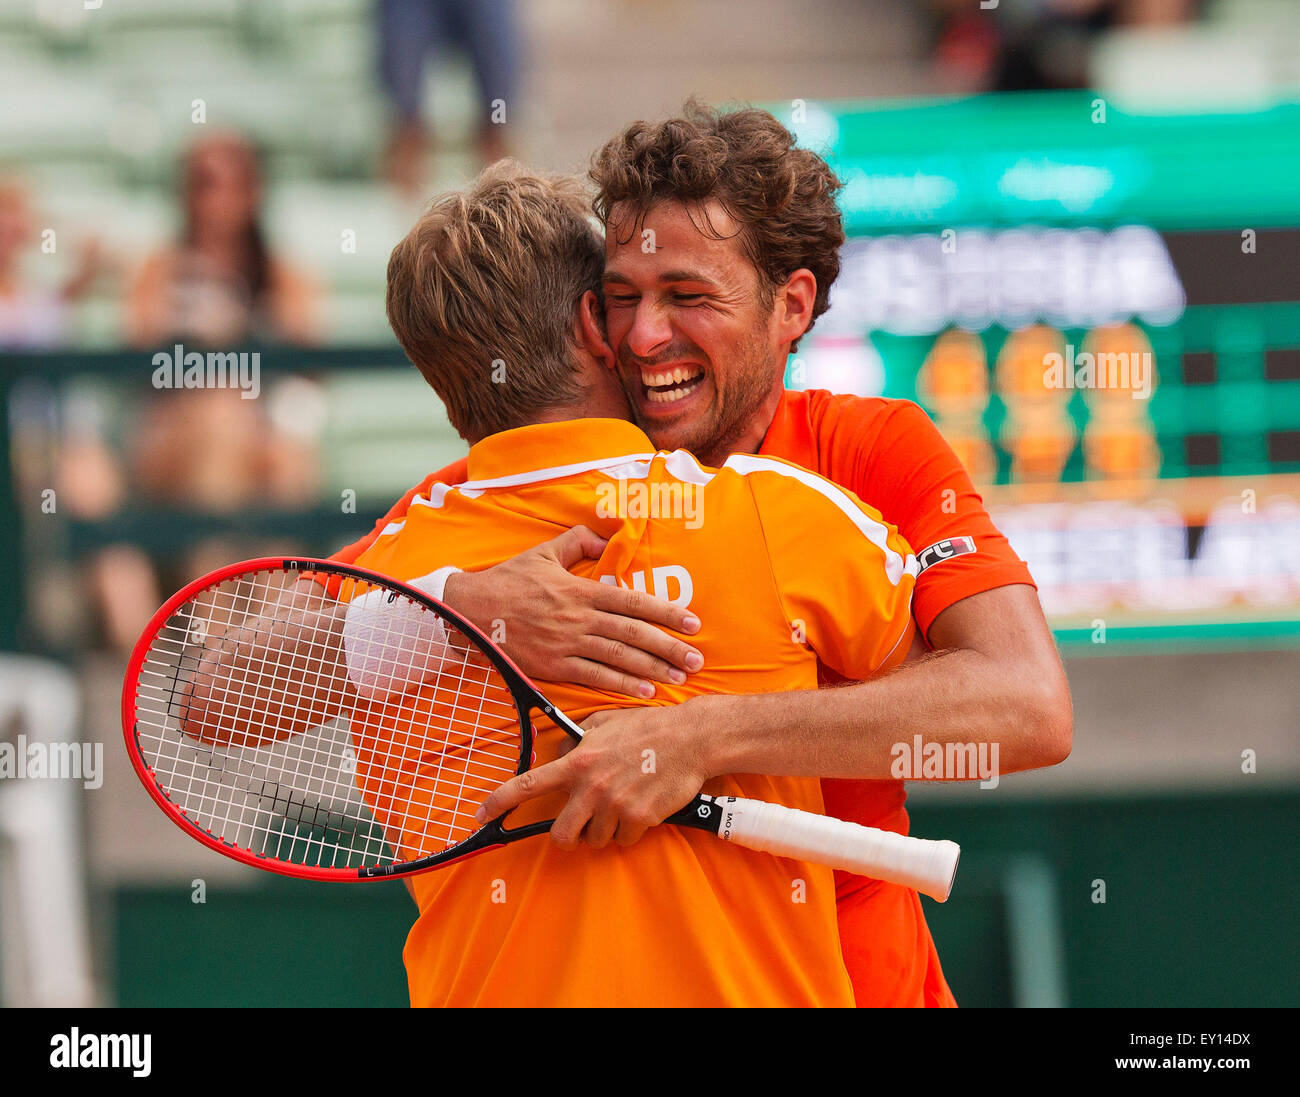 Austria. 19th July, 2015, Tennis,  Davis Cup, forth match between Dominic Thiem (AUT) and Robin Haase (NED), pictured: Robin Haase celebrates his win and put the Dutch in a 3-1 win, captain Jan Siemerink is embracing him  Credit:  Henk Koster/Alamy Live News Stock Photo